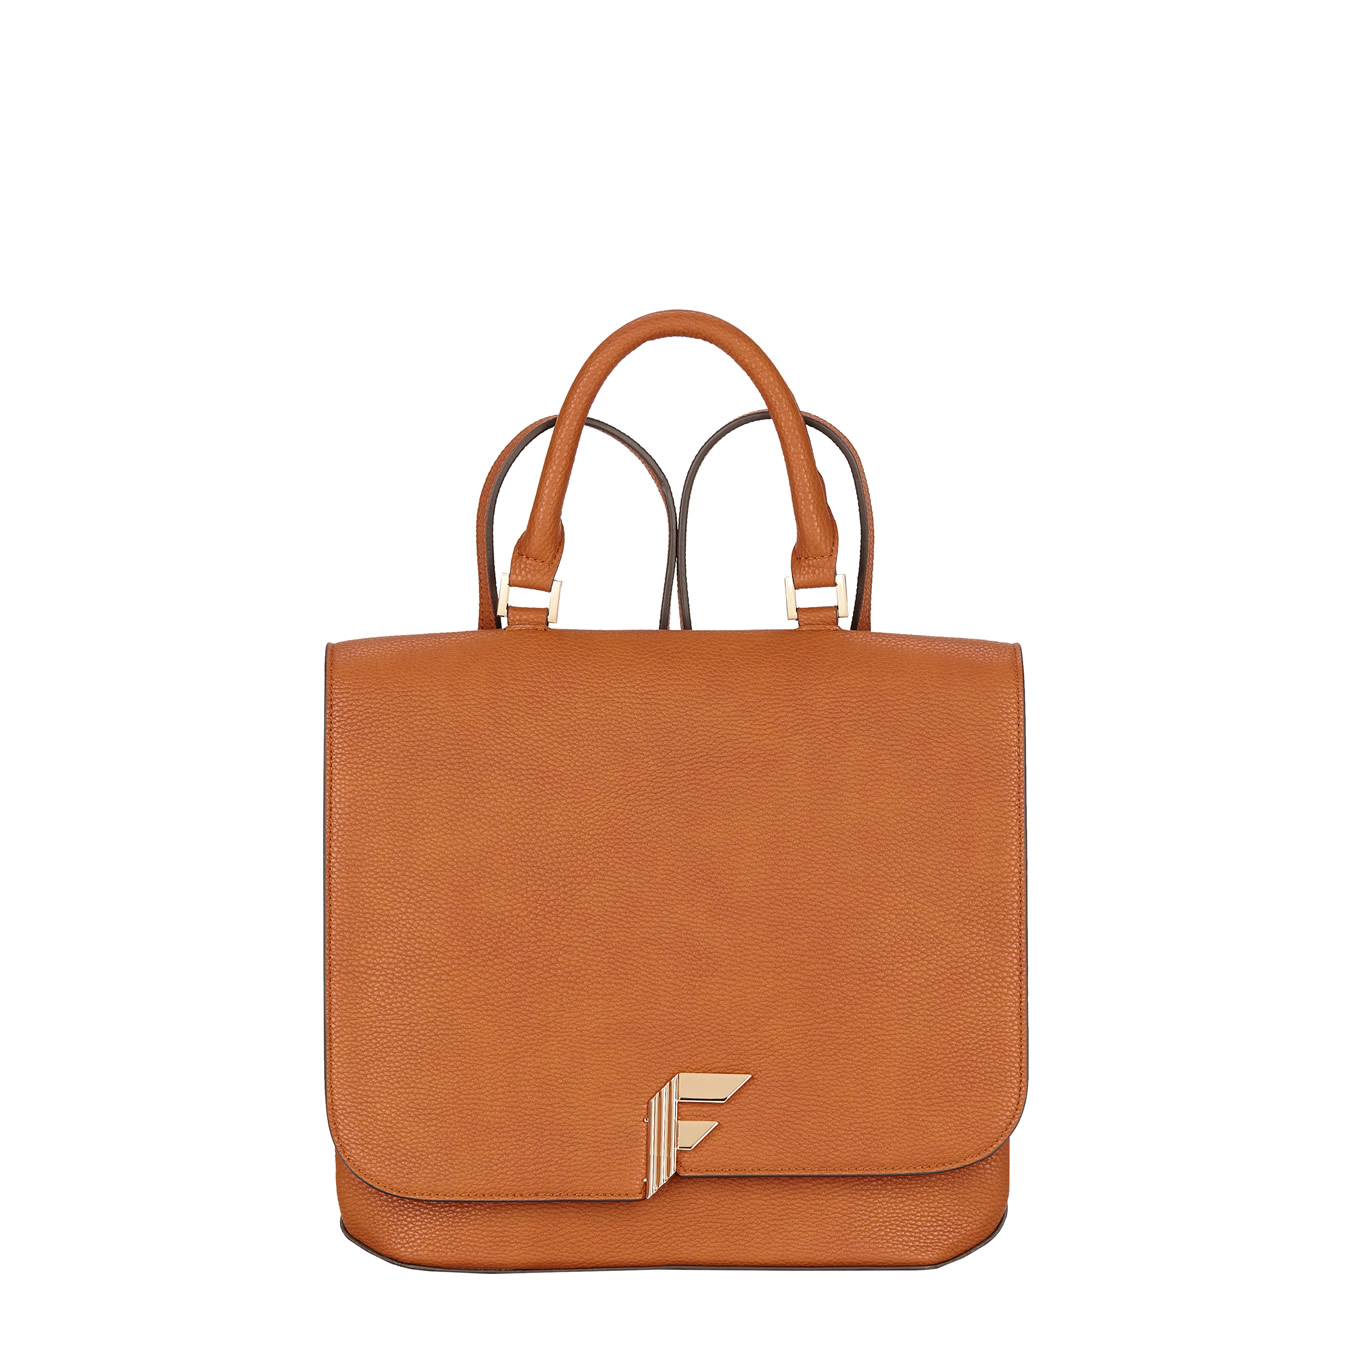 SECONDS - Fiorelli Bedford 2in1 Satchel to Backpack - TAN  - TAN